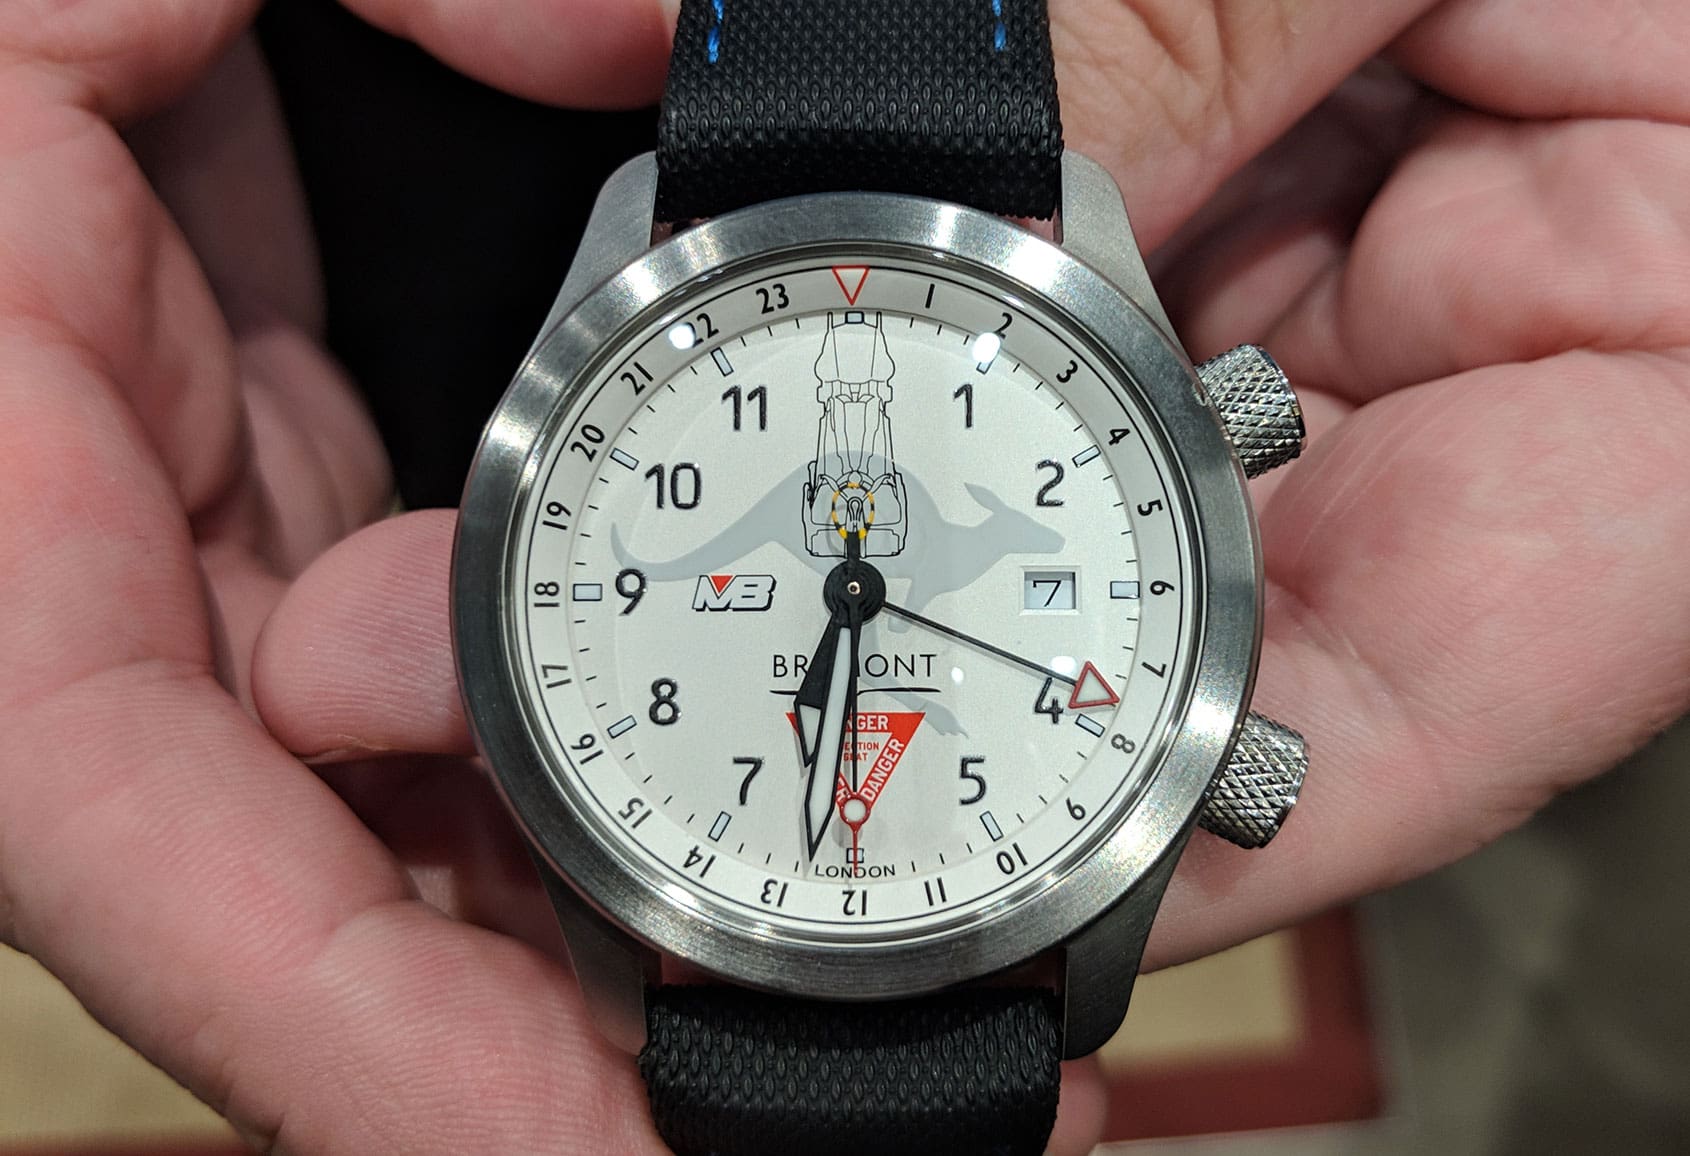 Are Bremont the new kings of mil-spec watches?